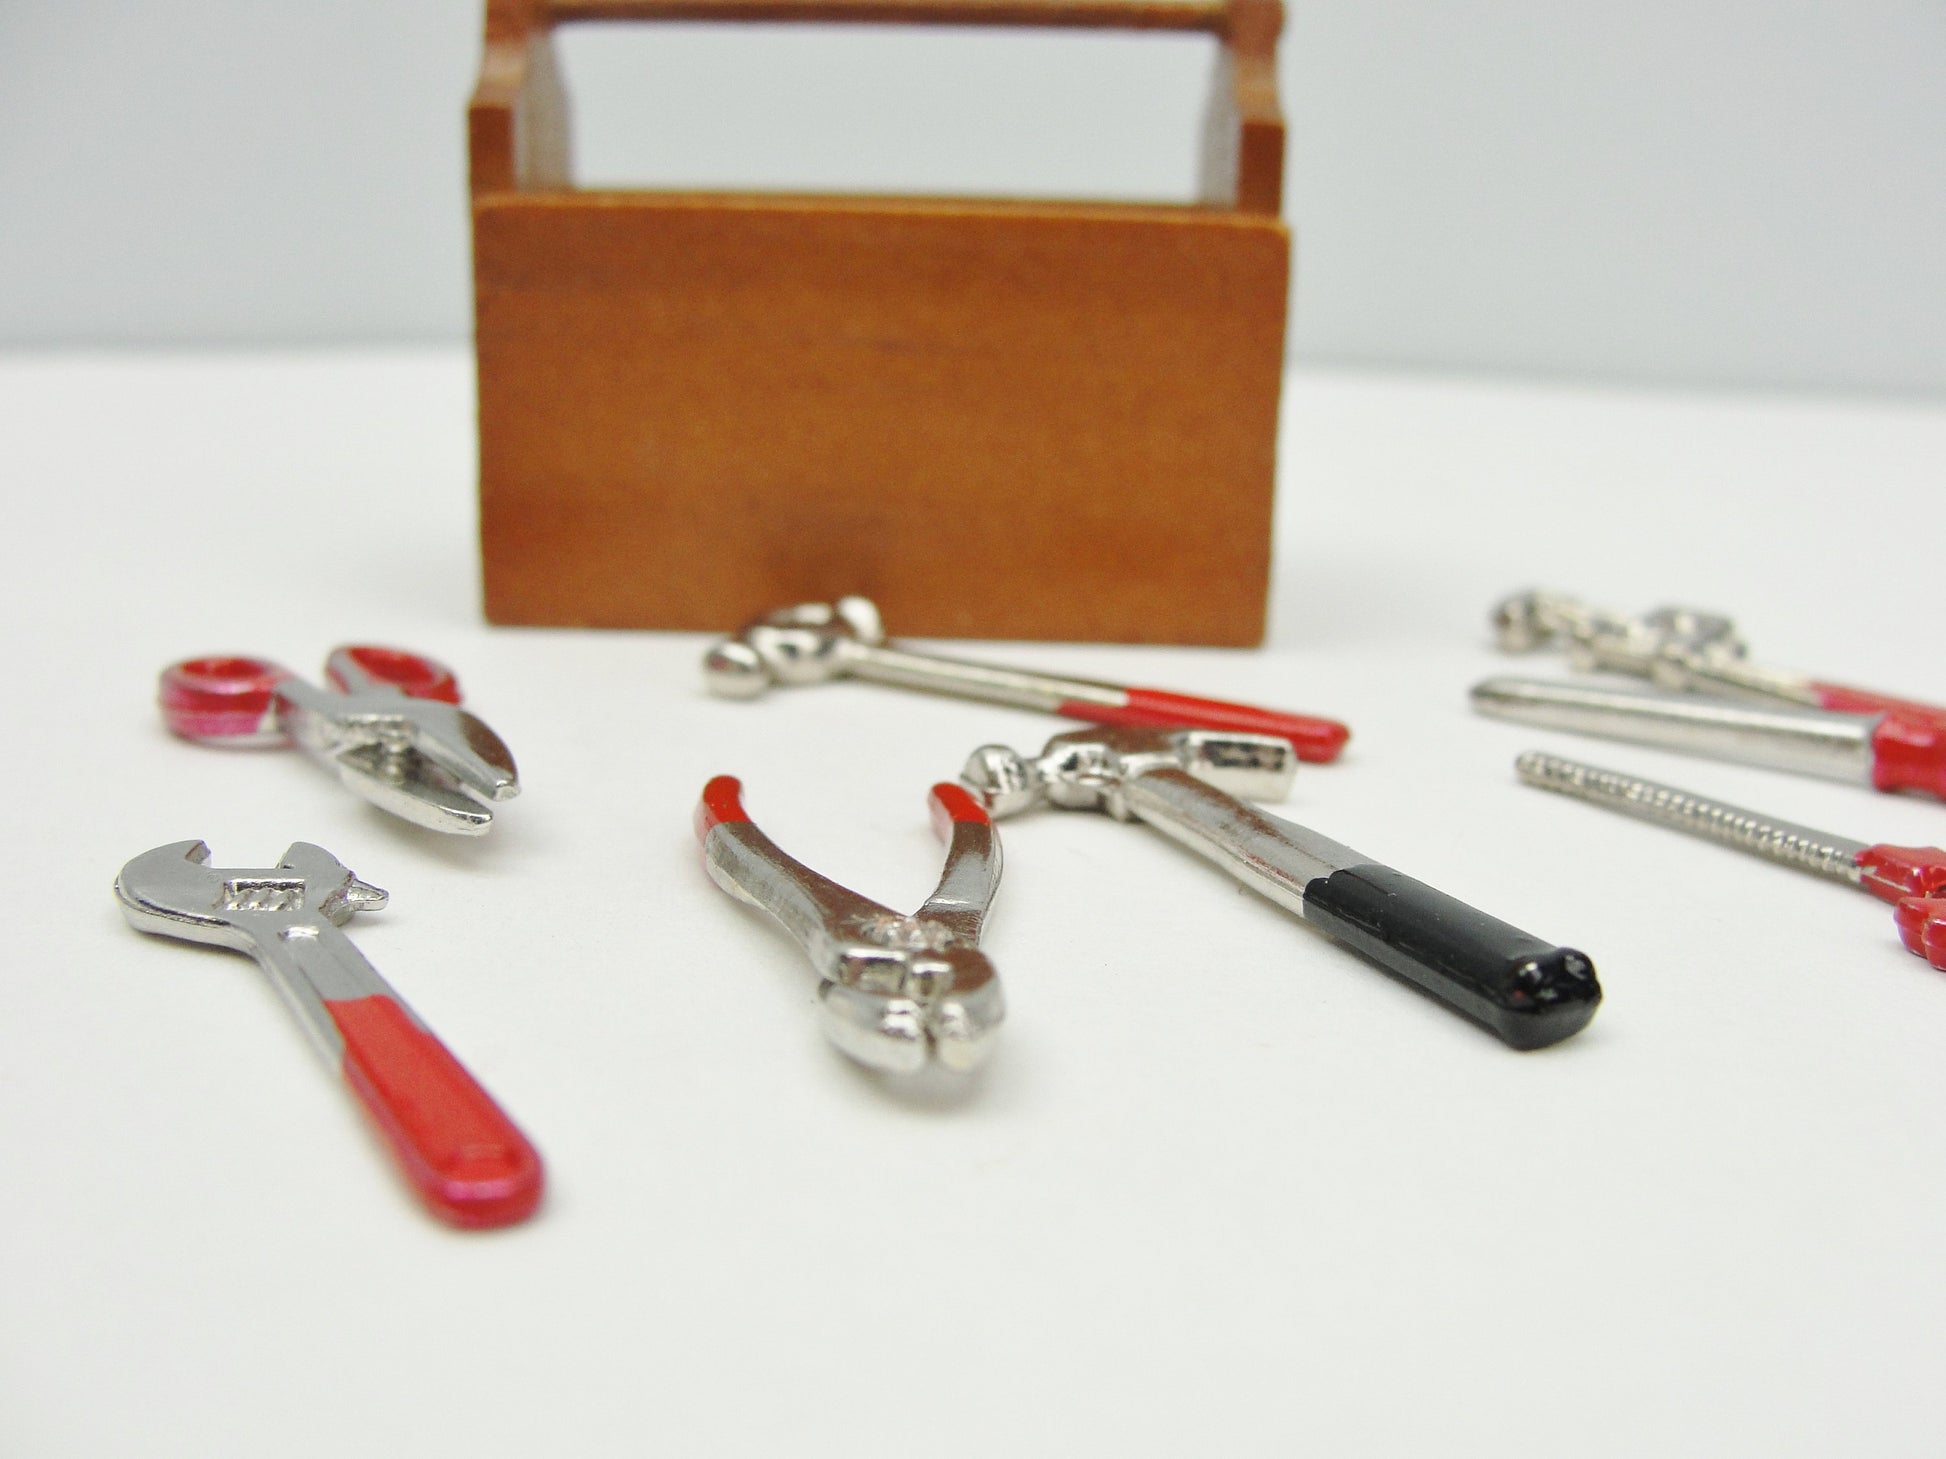 Dollhouse miniature tool box and tools - Miniatures - Craft Supply House